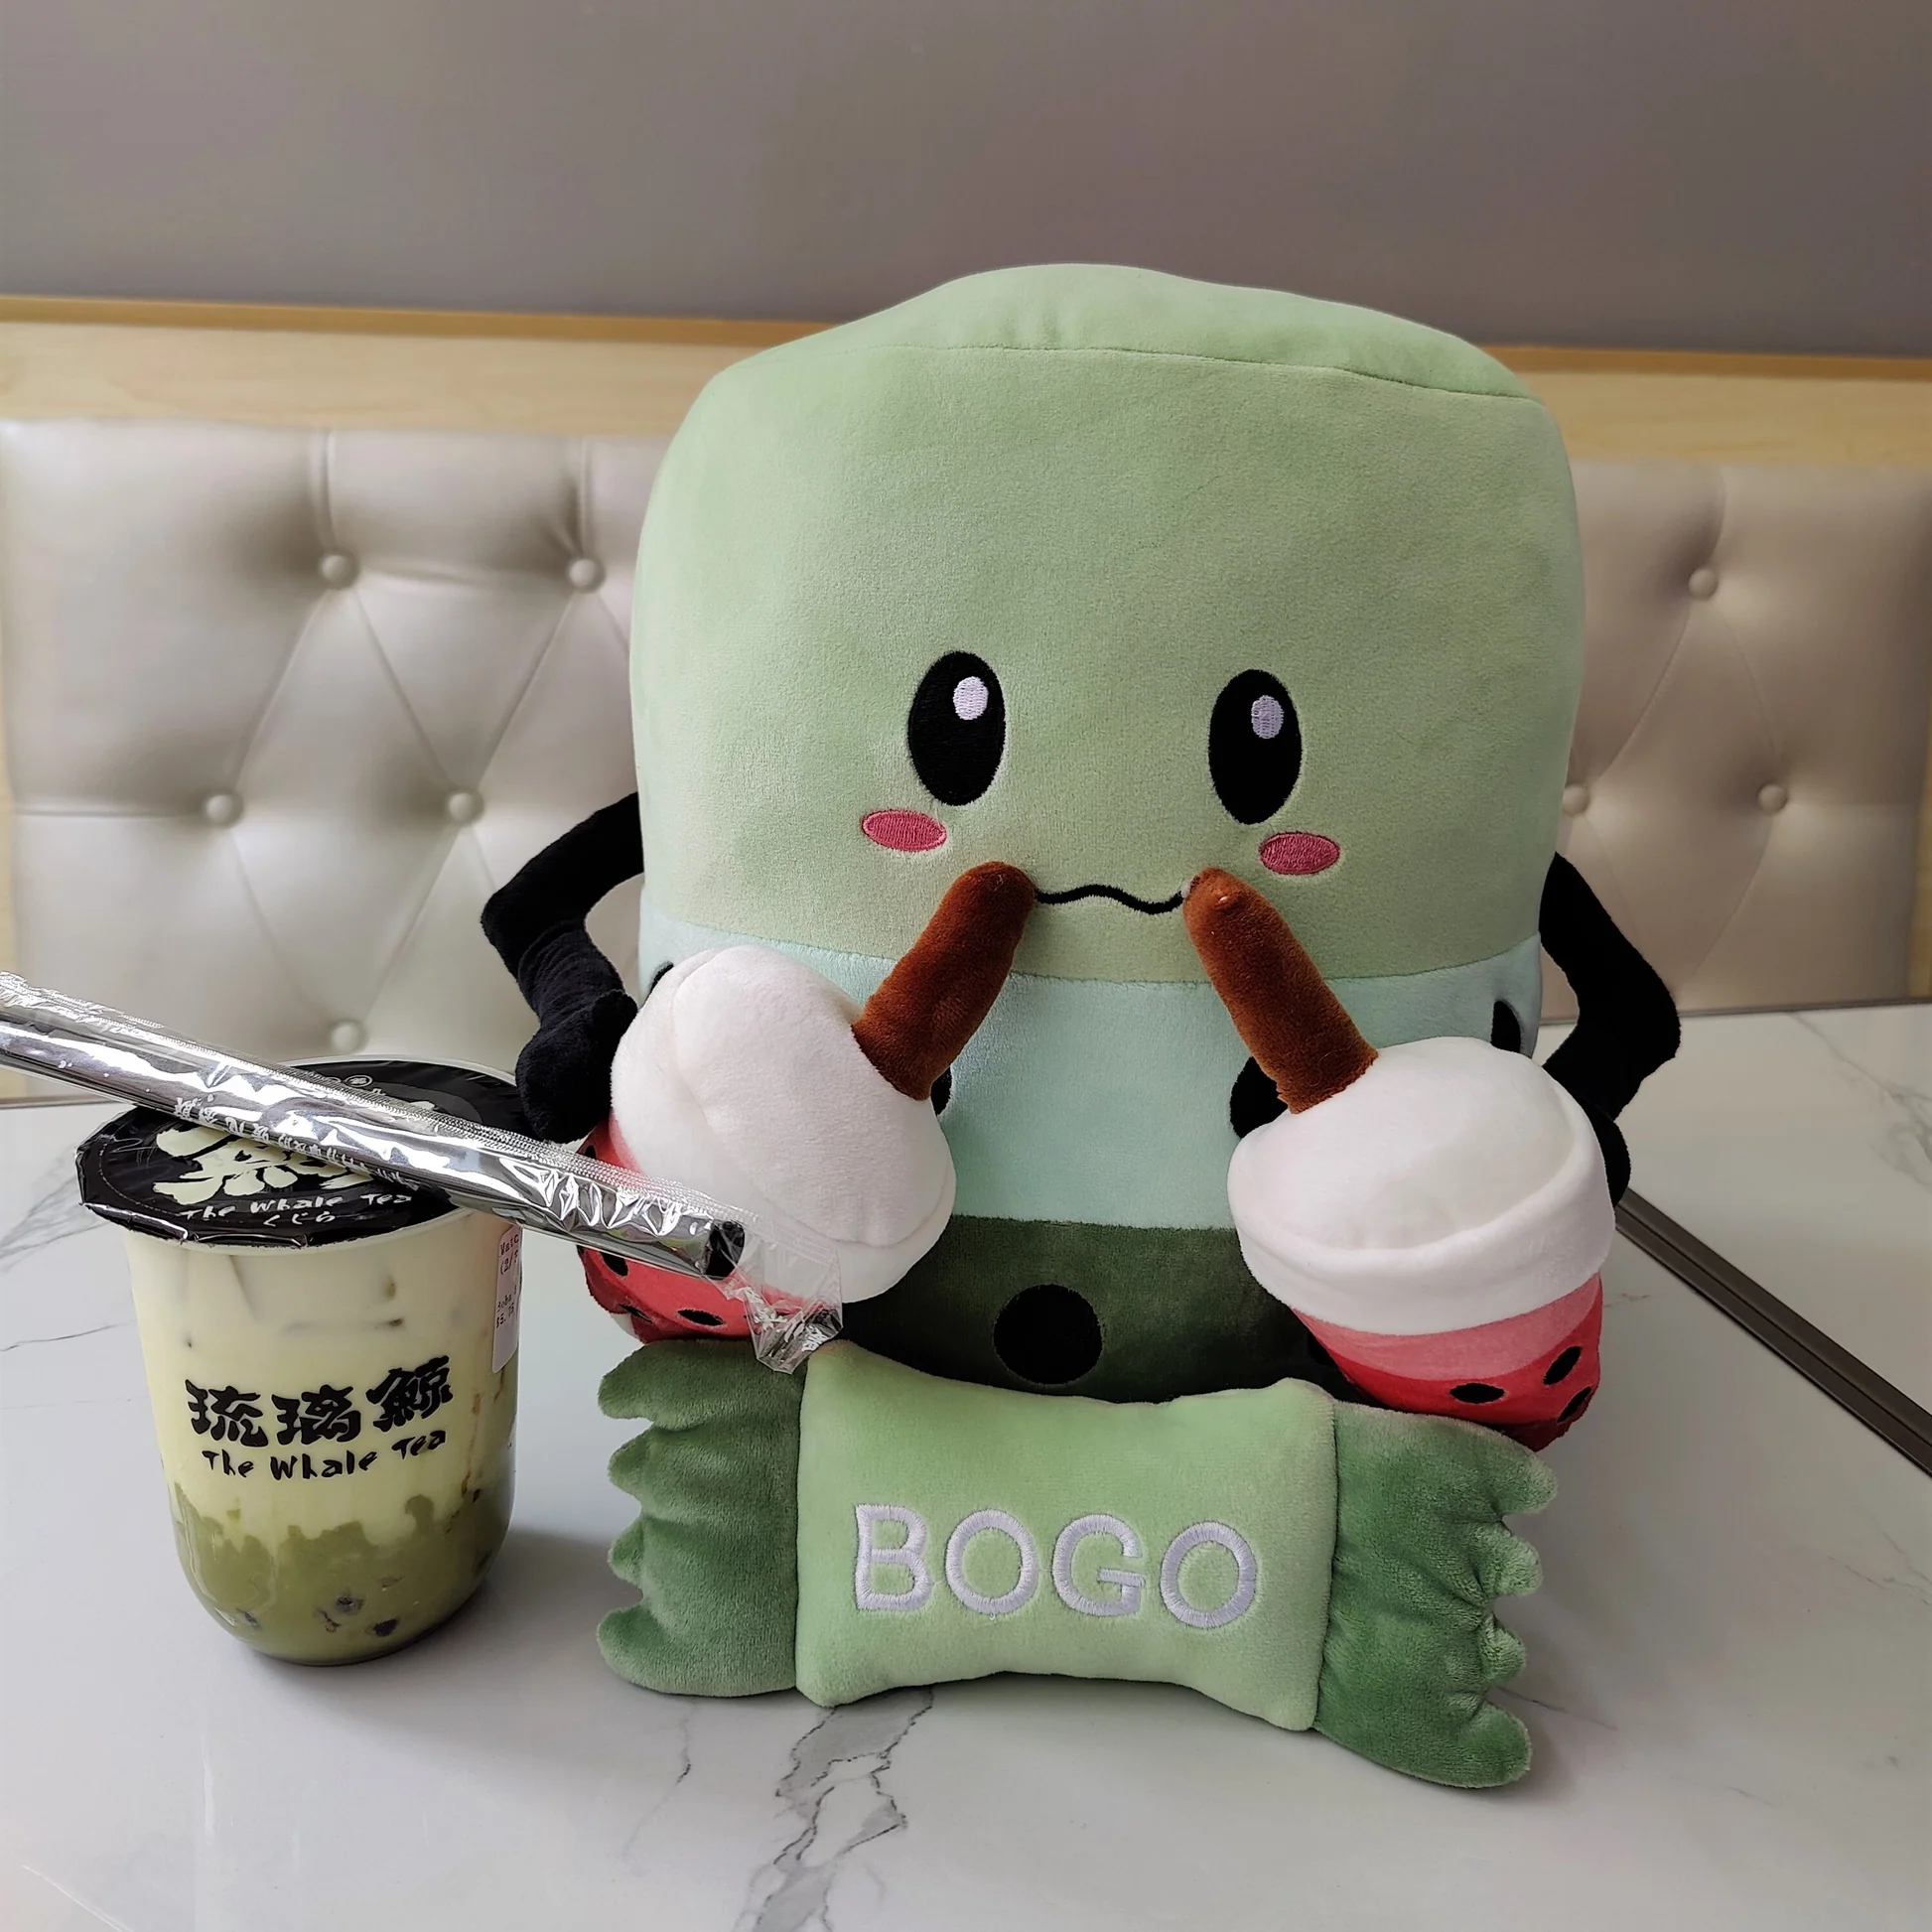 boggy - The Seven Deadly Sins Store